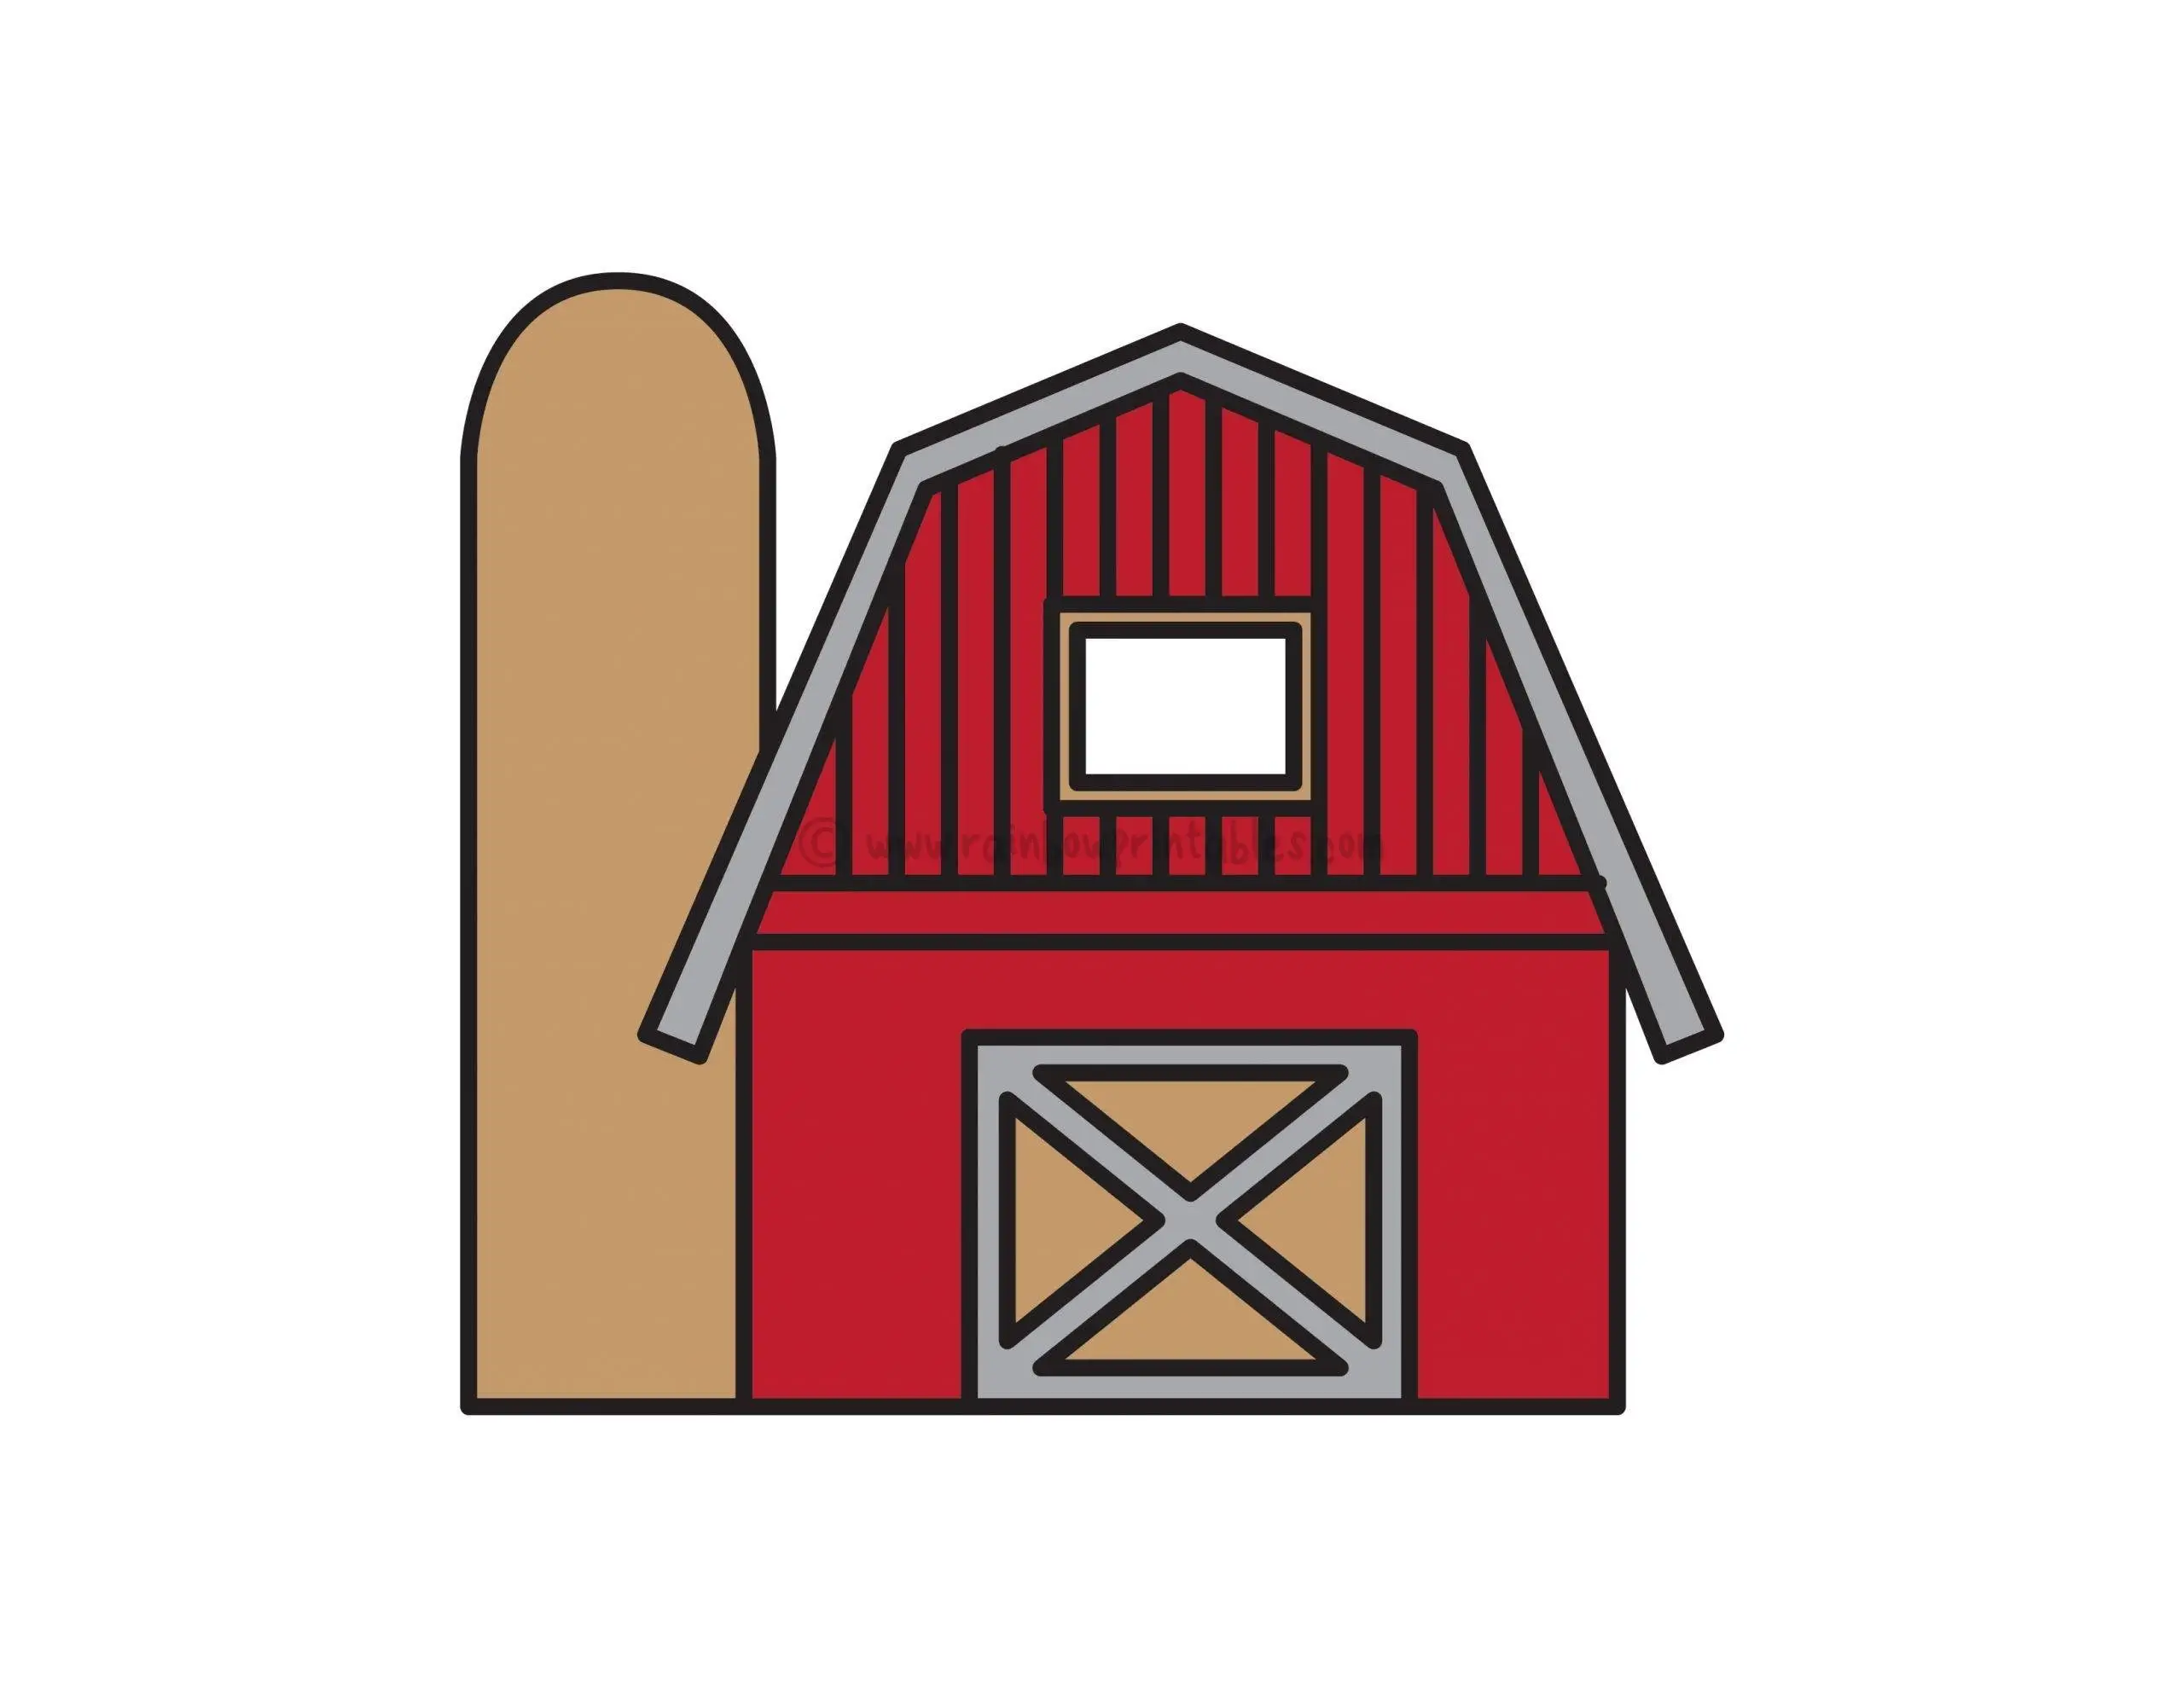 How To Draw RED BARN FARM Step By Step For Kids Easy Illustration Doodle Drawing GUIDE